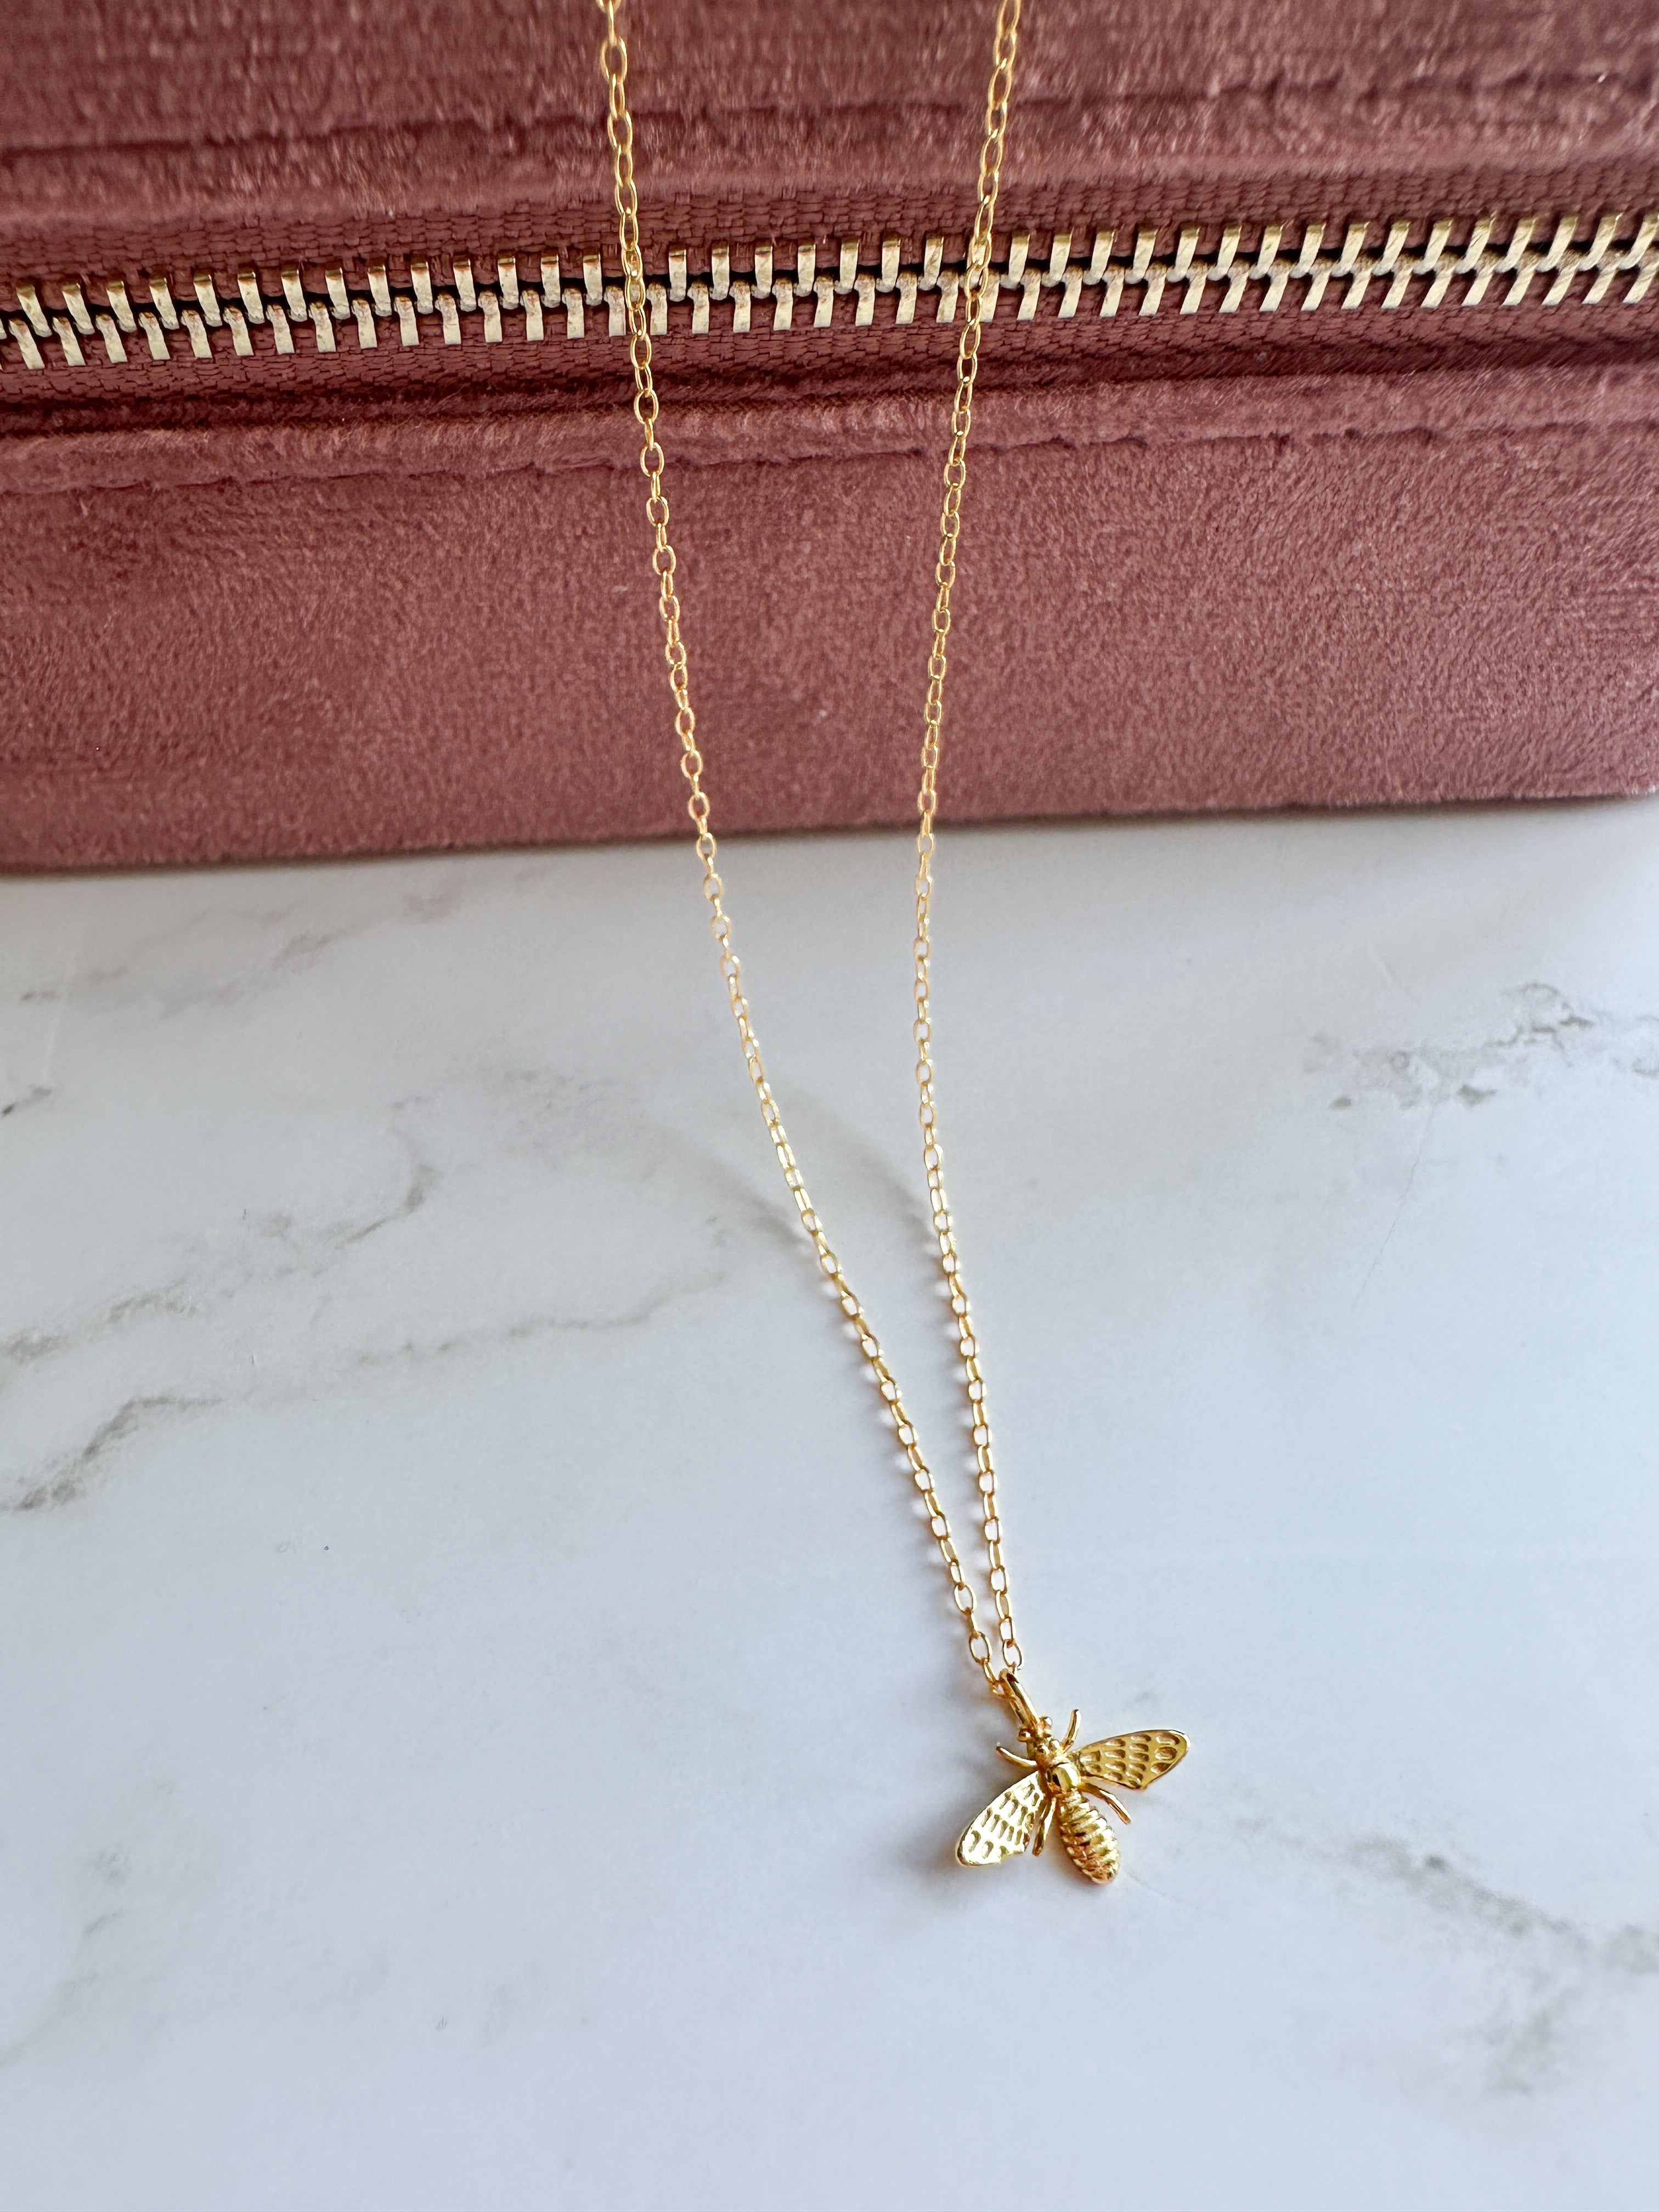 Bee kind necklace, limited edition